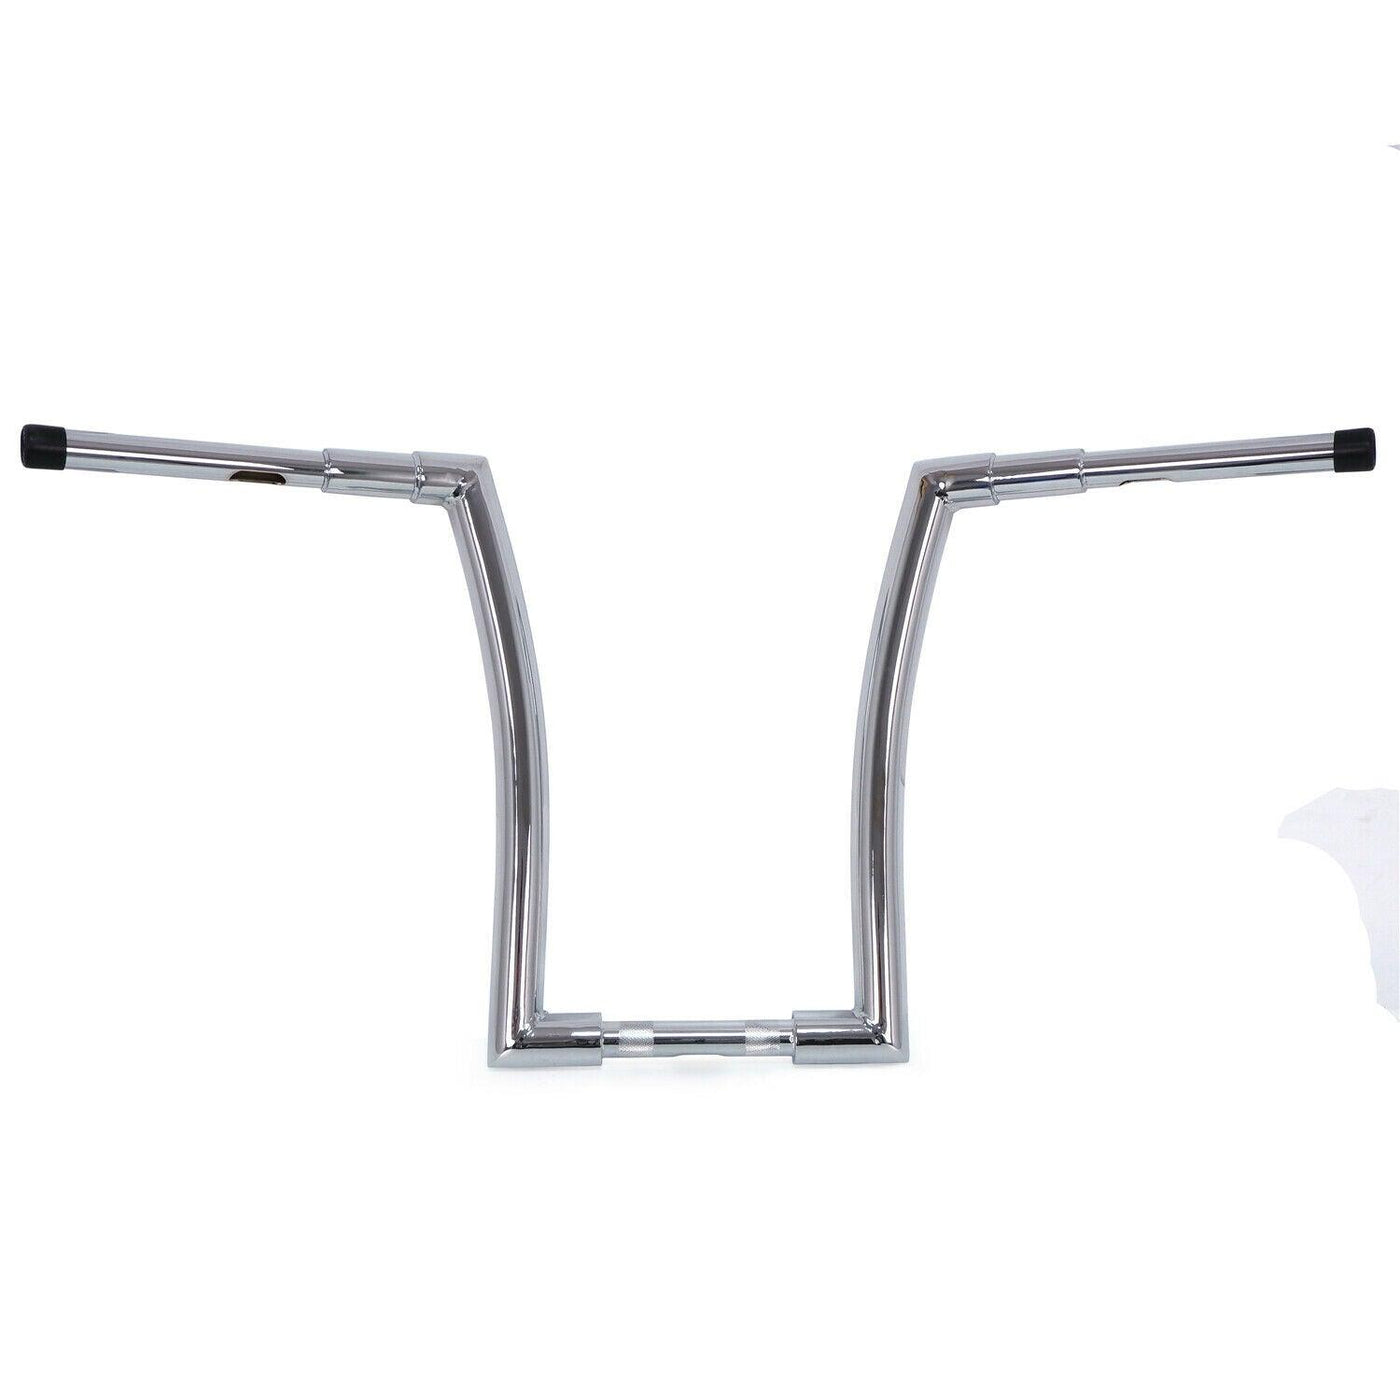 16" Chrome Ape Fat Hanger Bar 1.5" Handlebar For Harley 18-later Softail 12-16 F - Moto Life Products